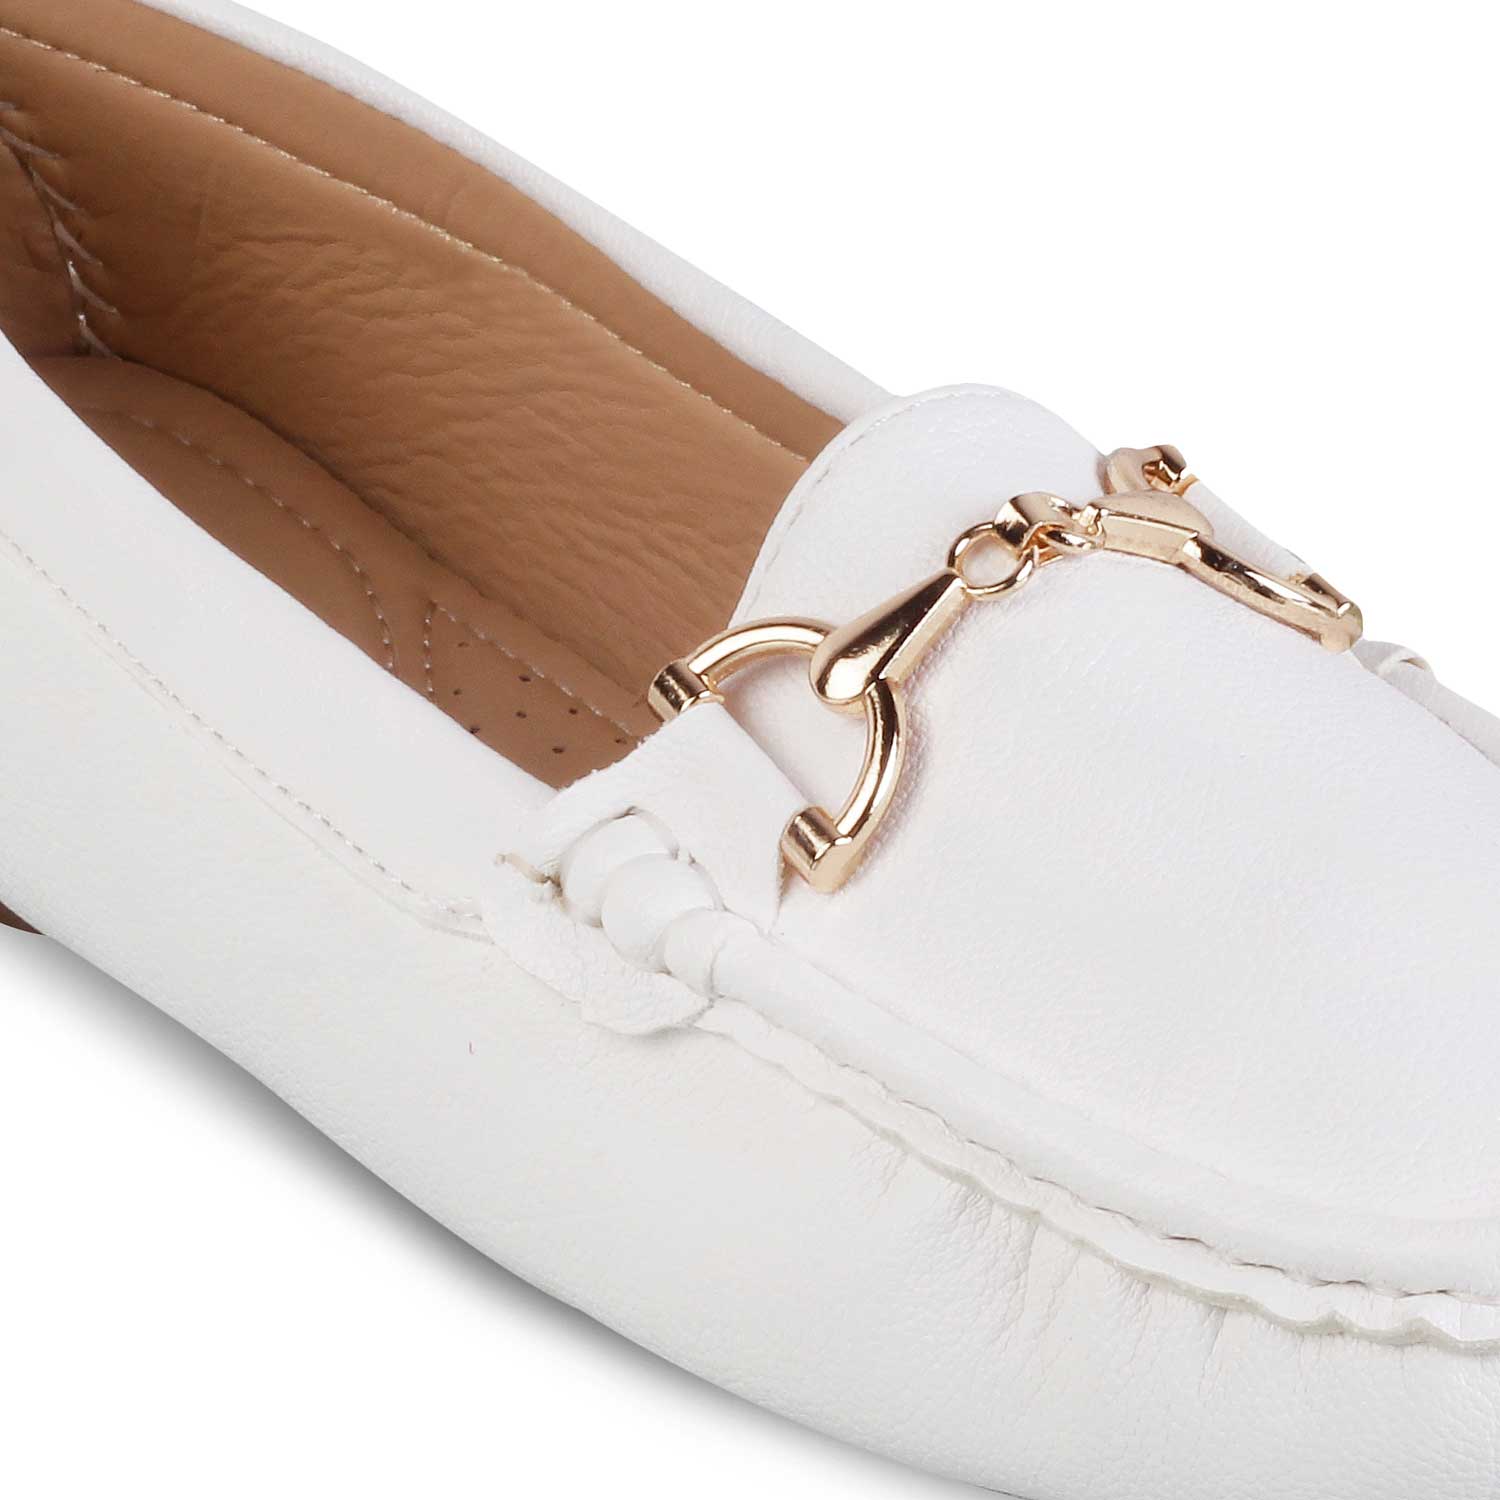 Ueno White Womens Loafers Online at Tresmode